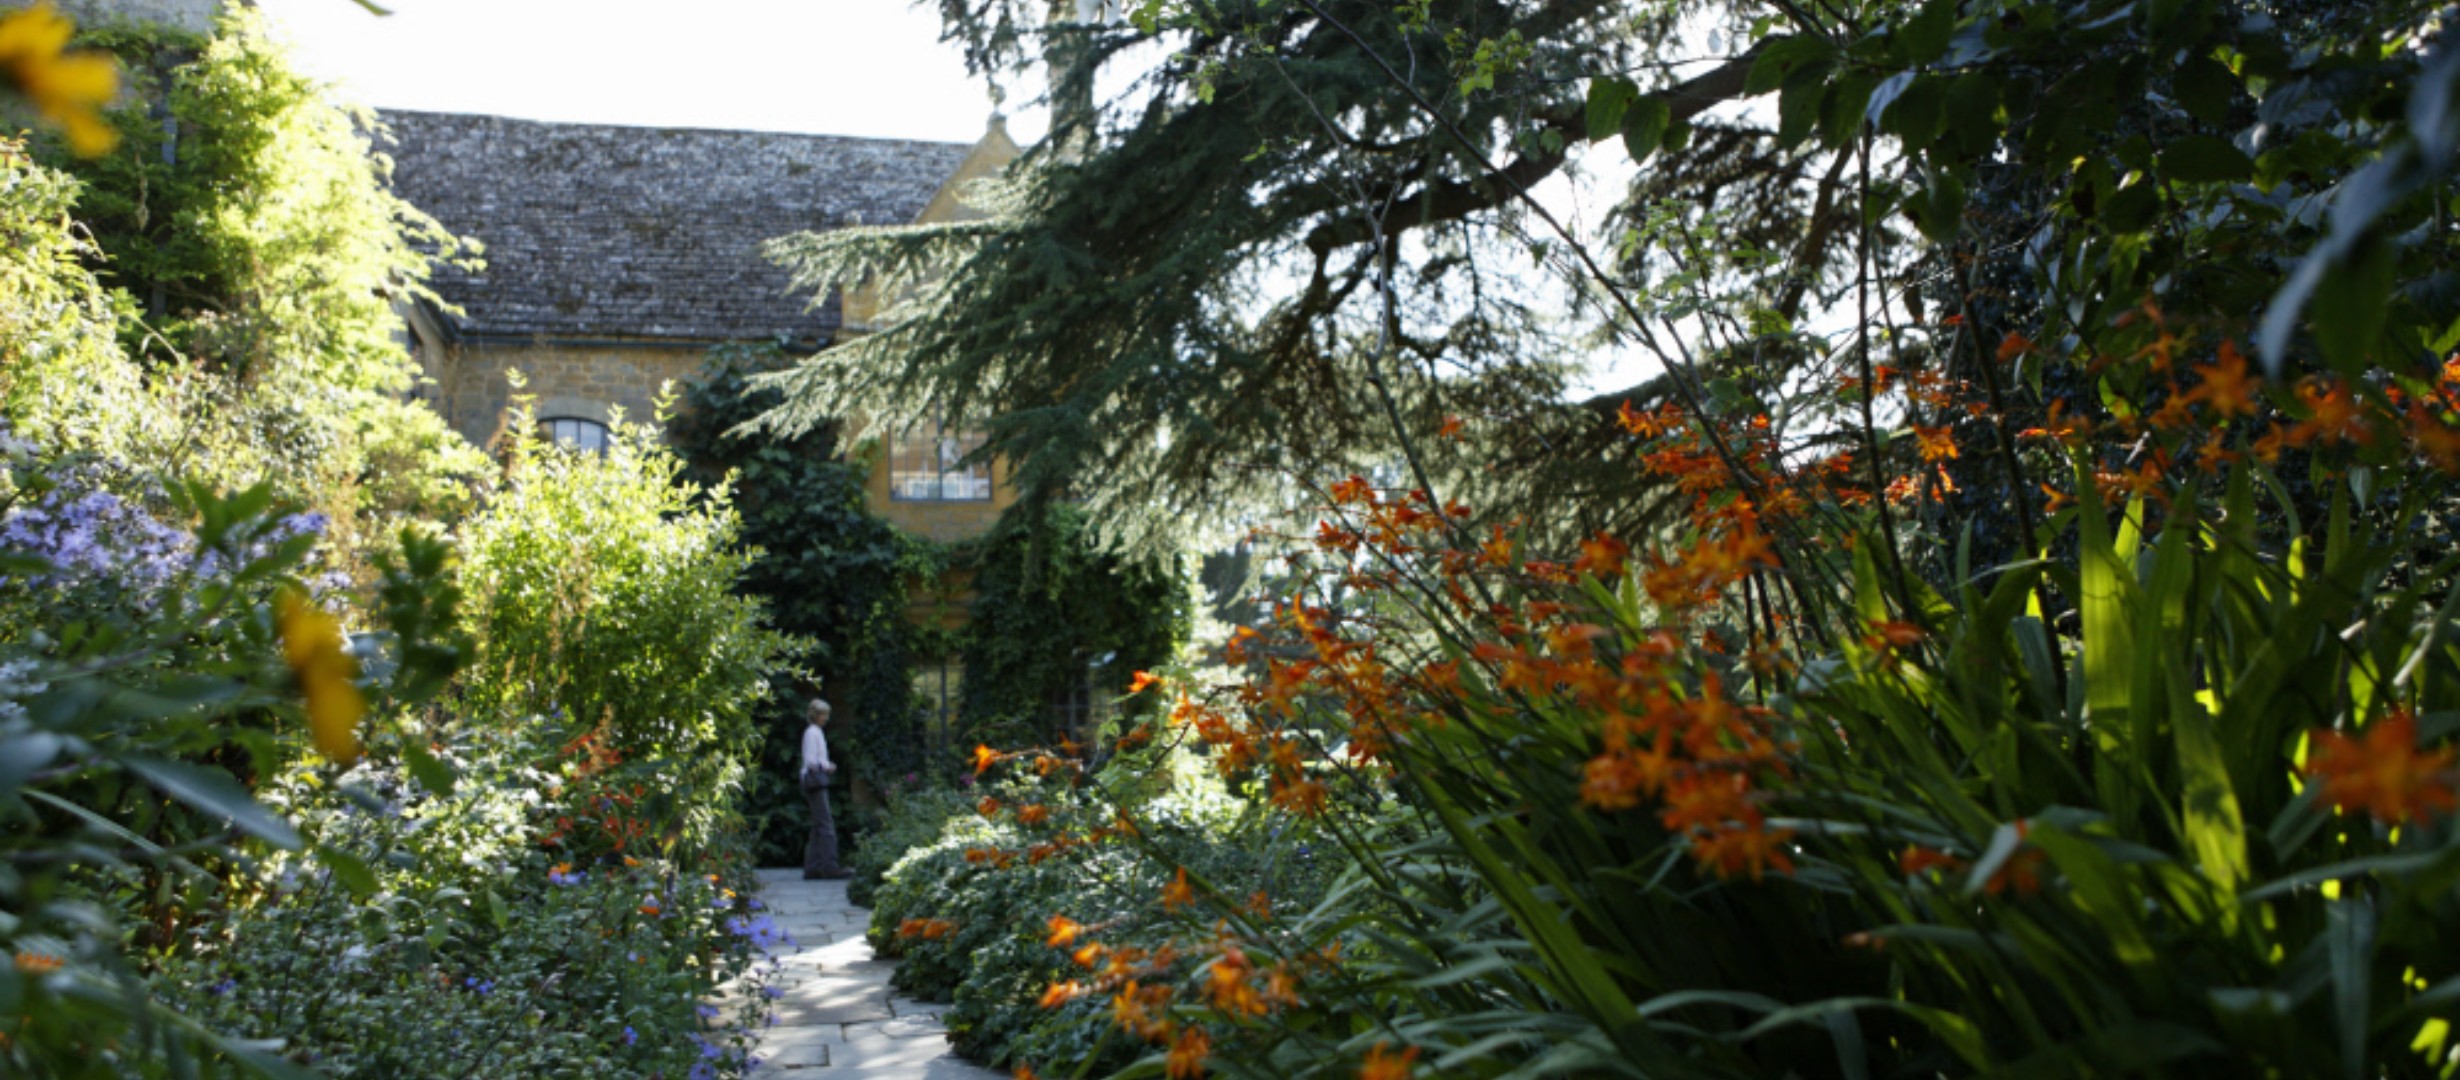 The view to the house from the accessible pathway in the Old Garden